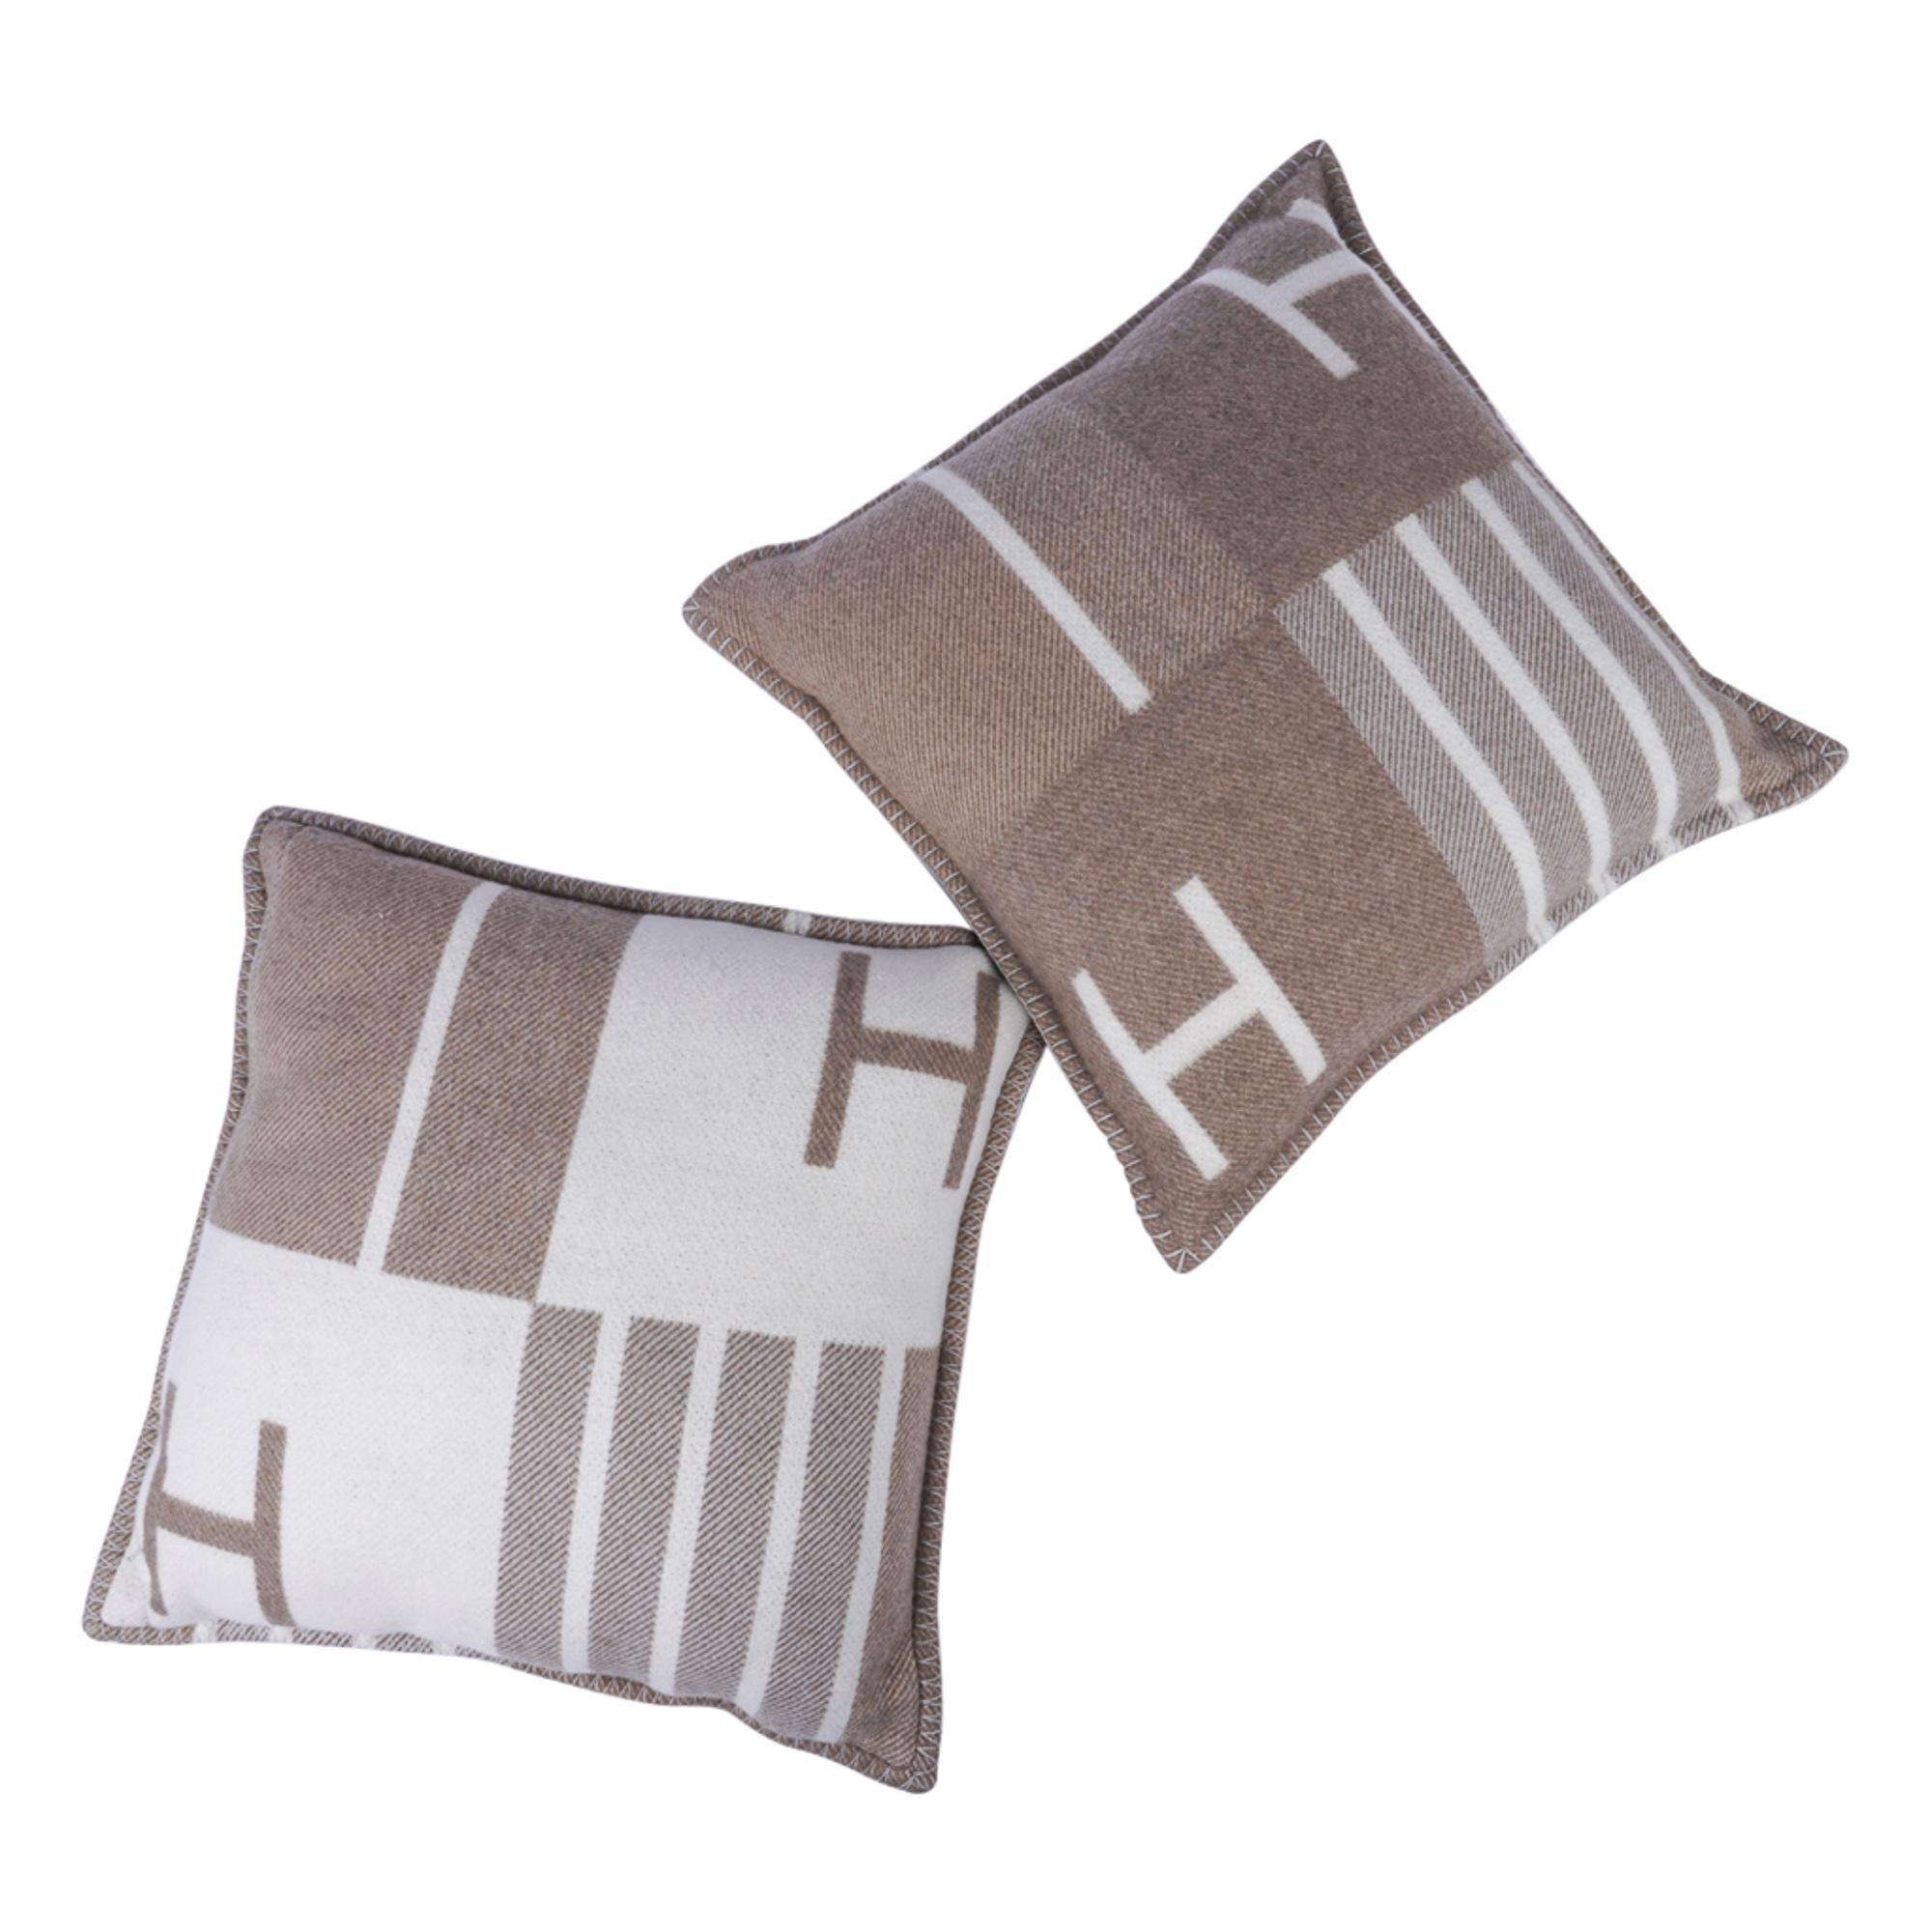 Guaranteed authentic Hermes small model limited edition Avalon Vibration pillows set of two (2) with the iconic H featured in Taupe and Ecru.
The removable cover is created from 90% Wool and 10% Cashmere and has whip stitch edges.
Comes with